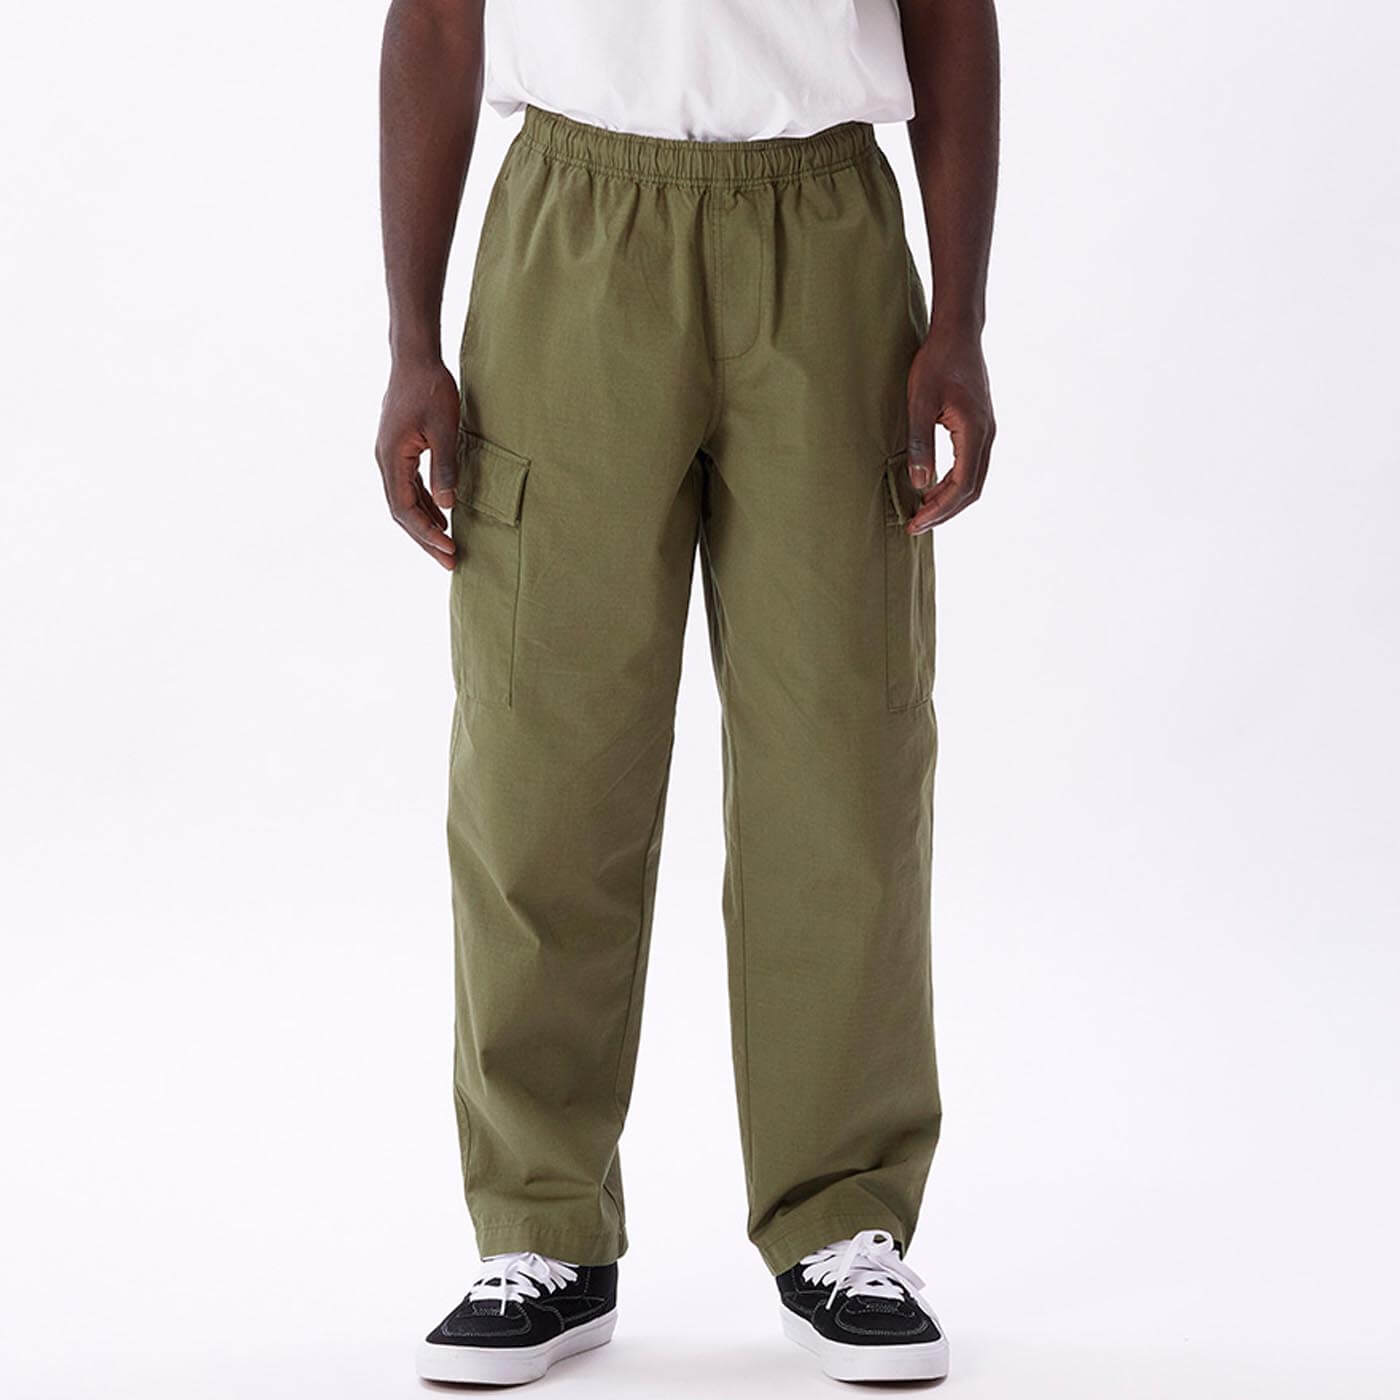 Obey Easy Ripstop Cargo Pants - Khaki - The Boredroom Store Obey